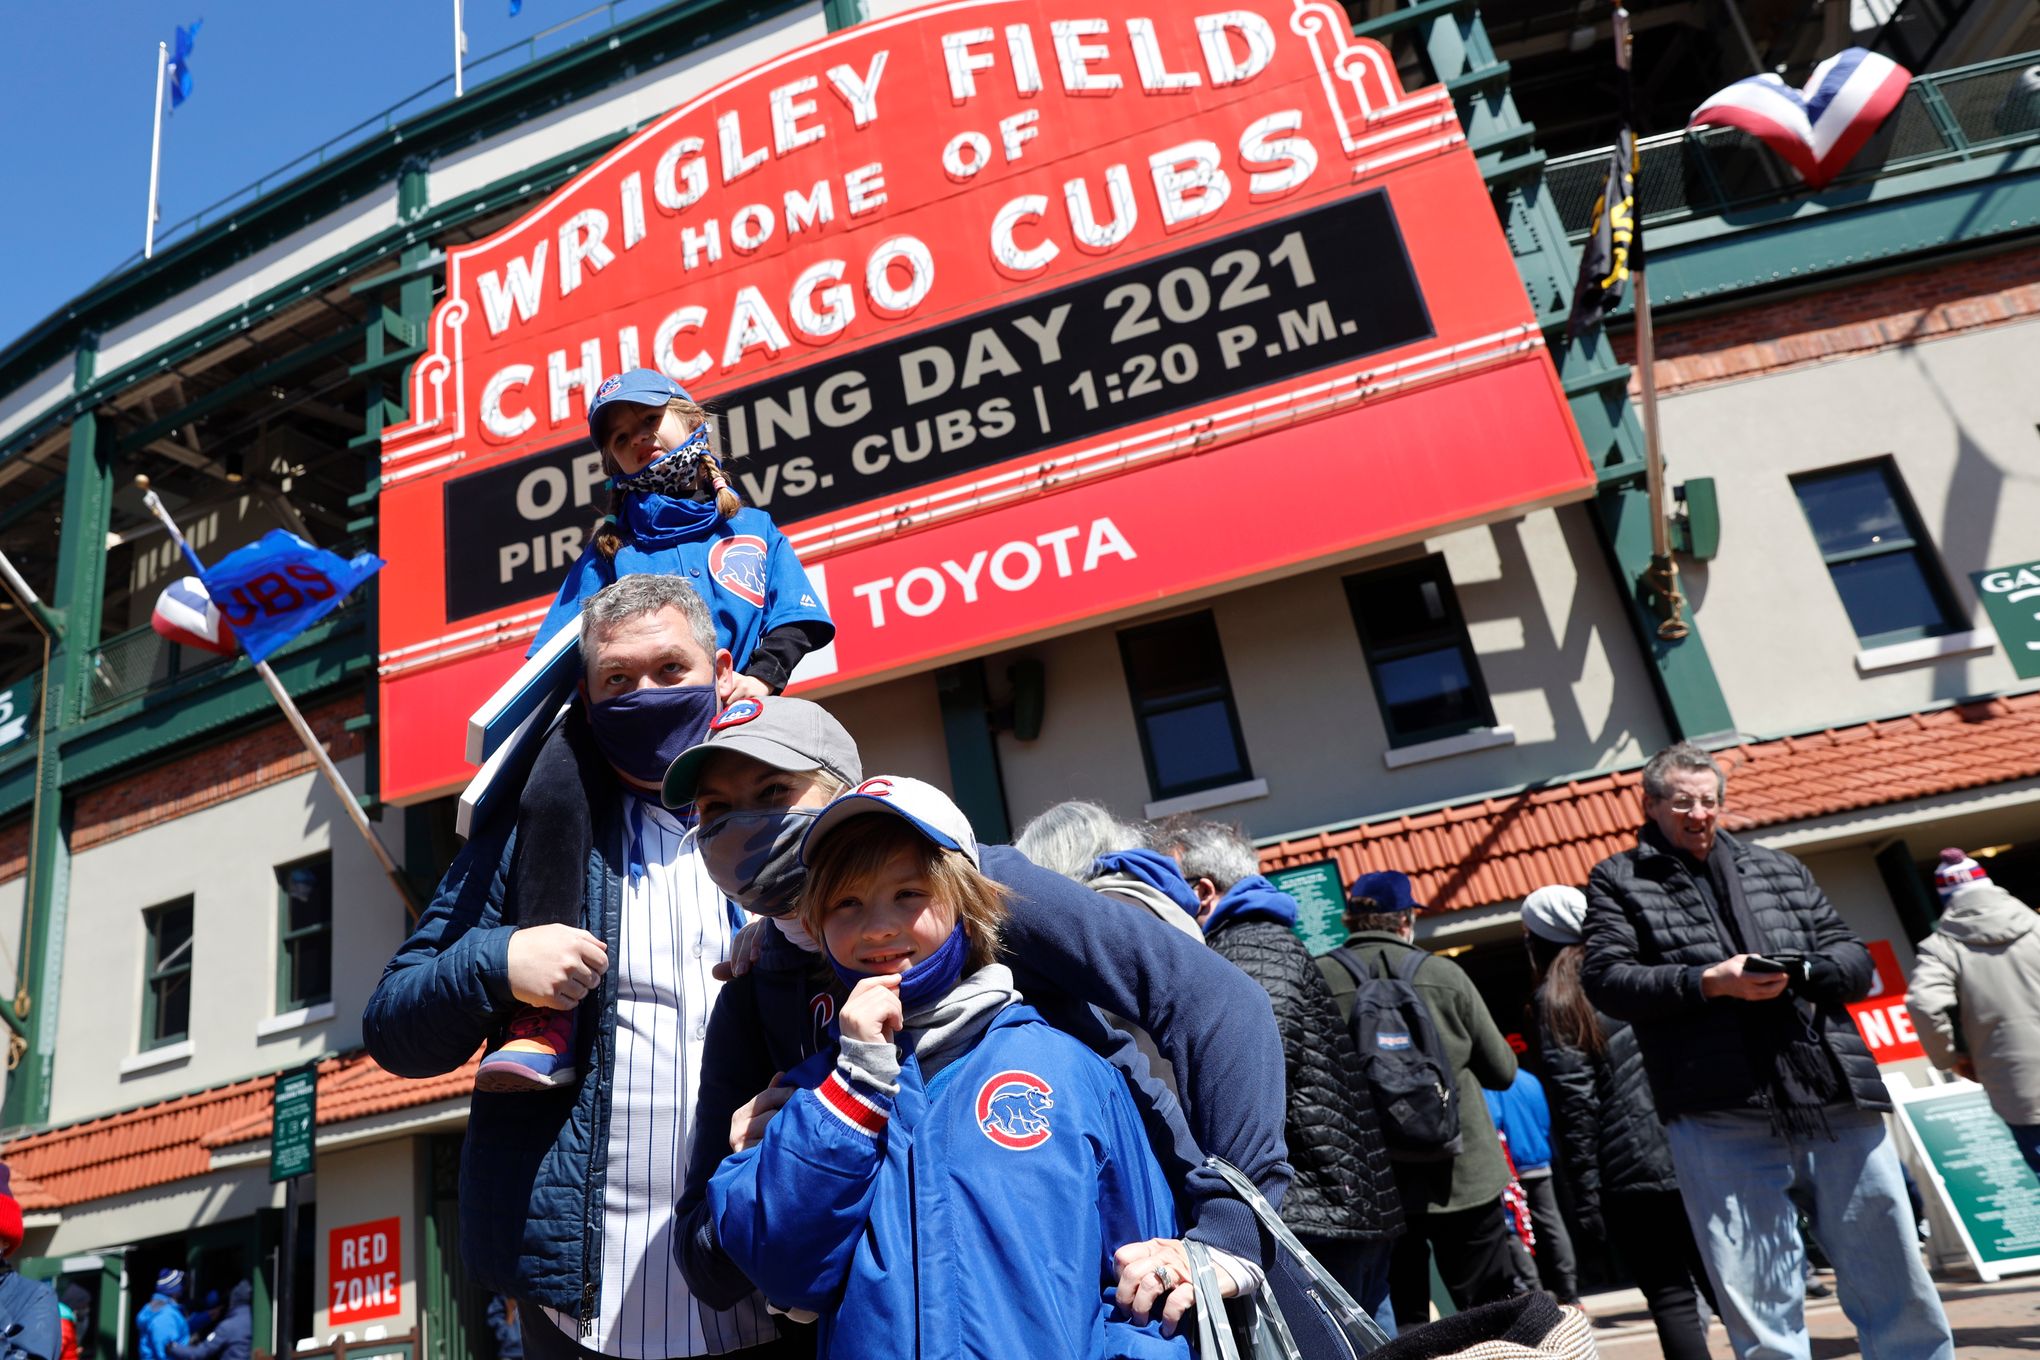 Chicago Cubs Concerned About Possible COVID-19 Outbreak